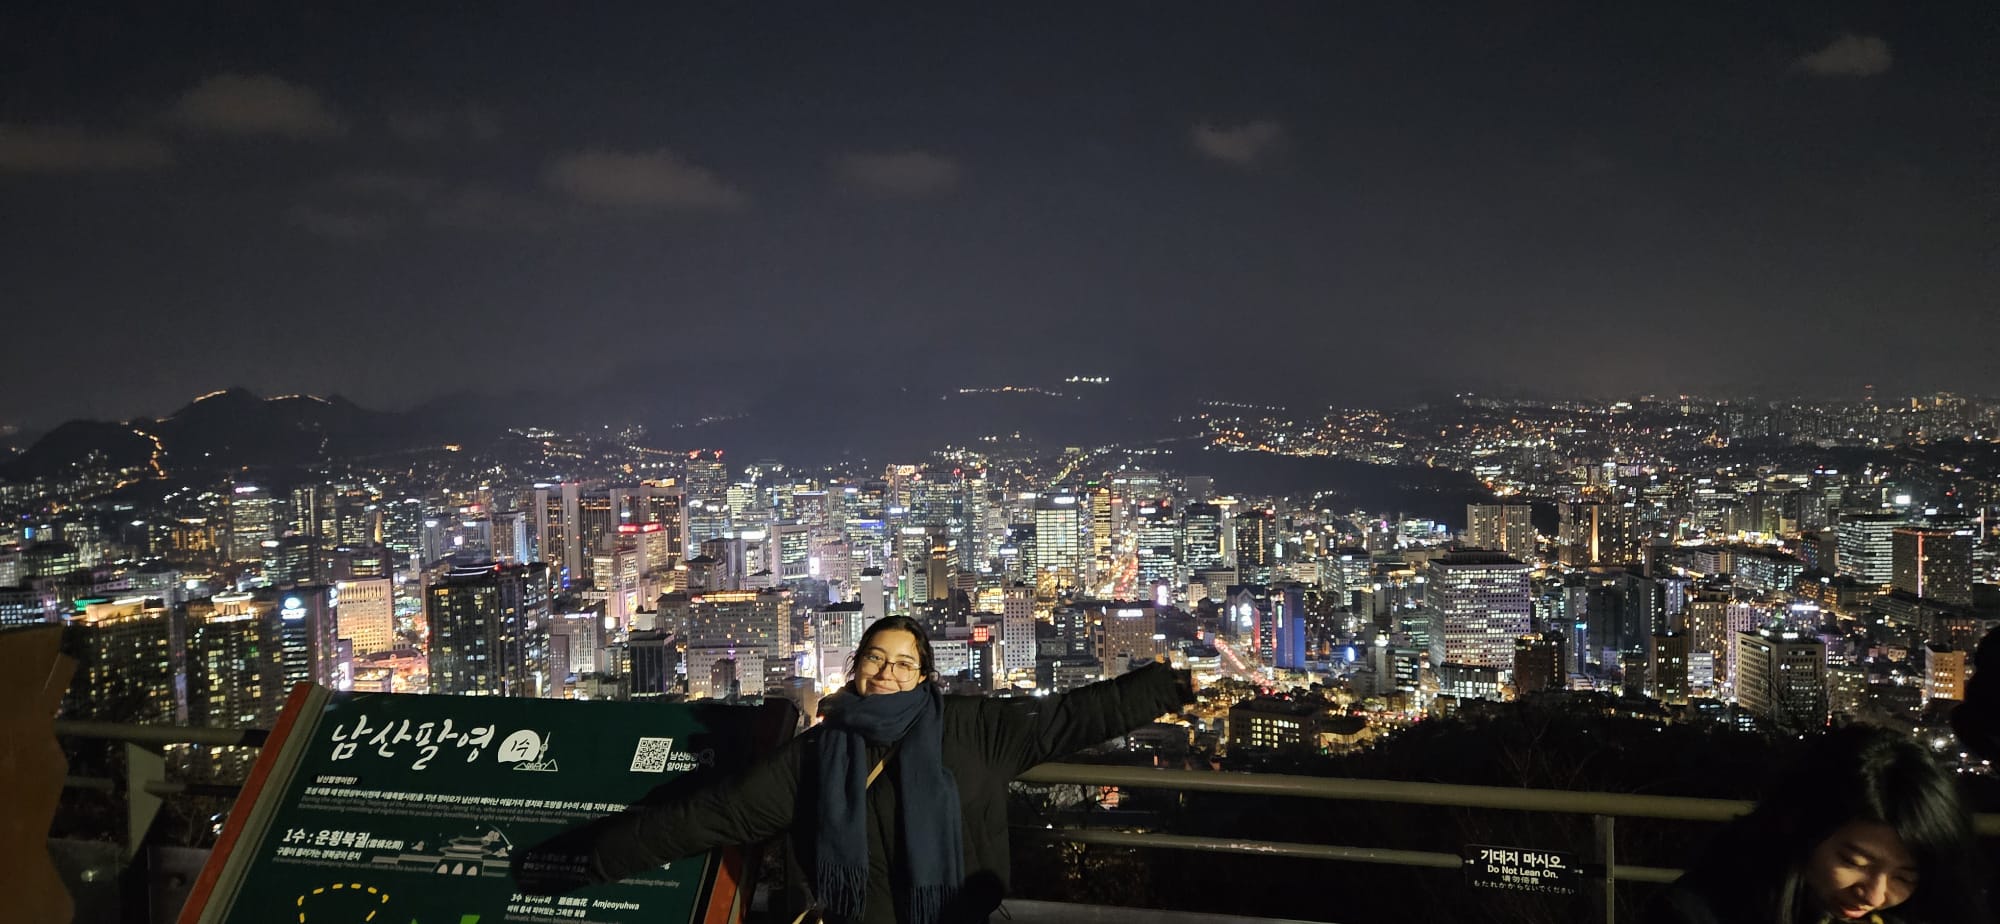 Me and the view of Seoul from Namsan Tower!